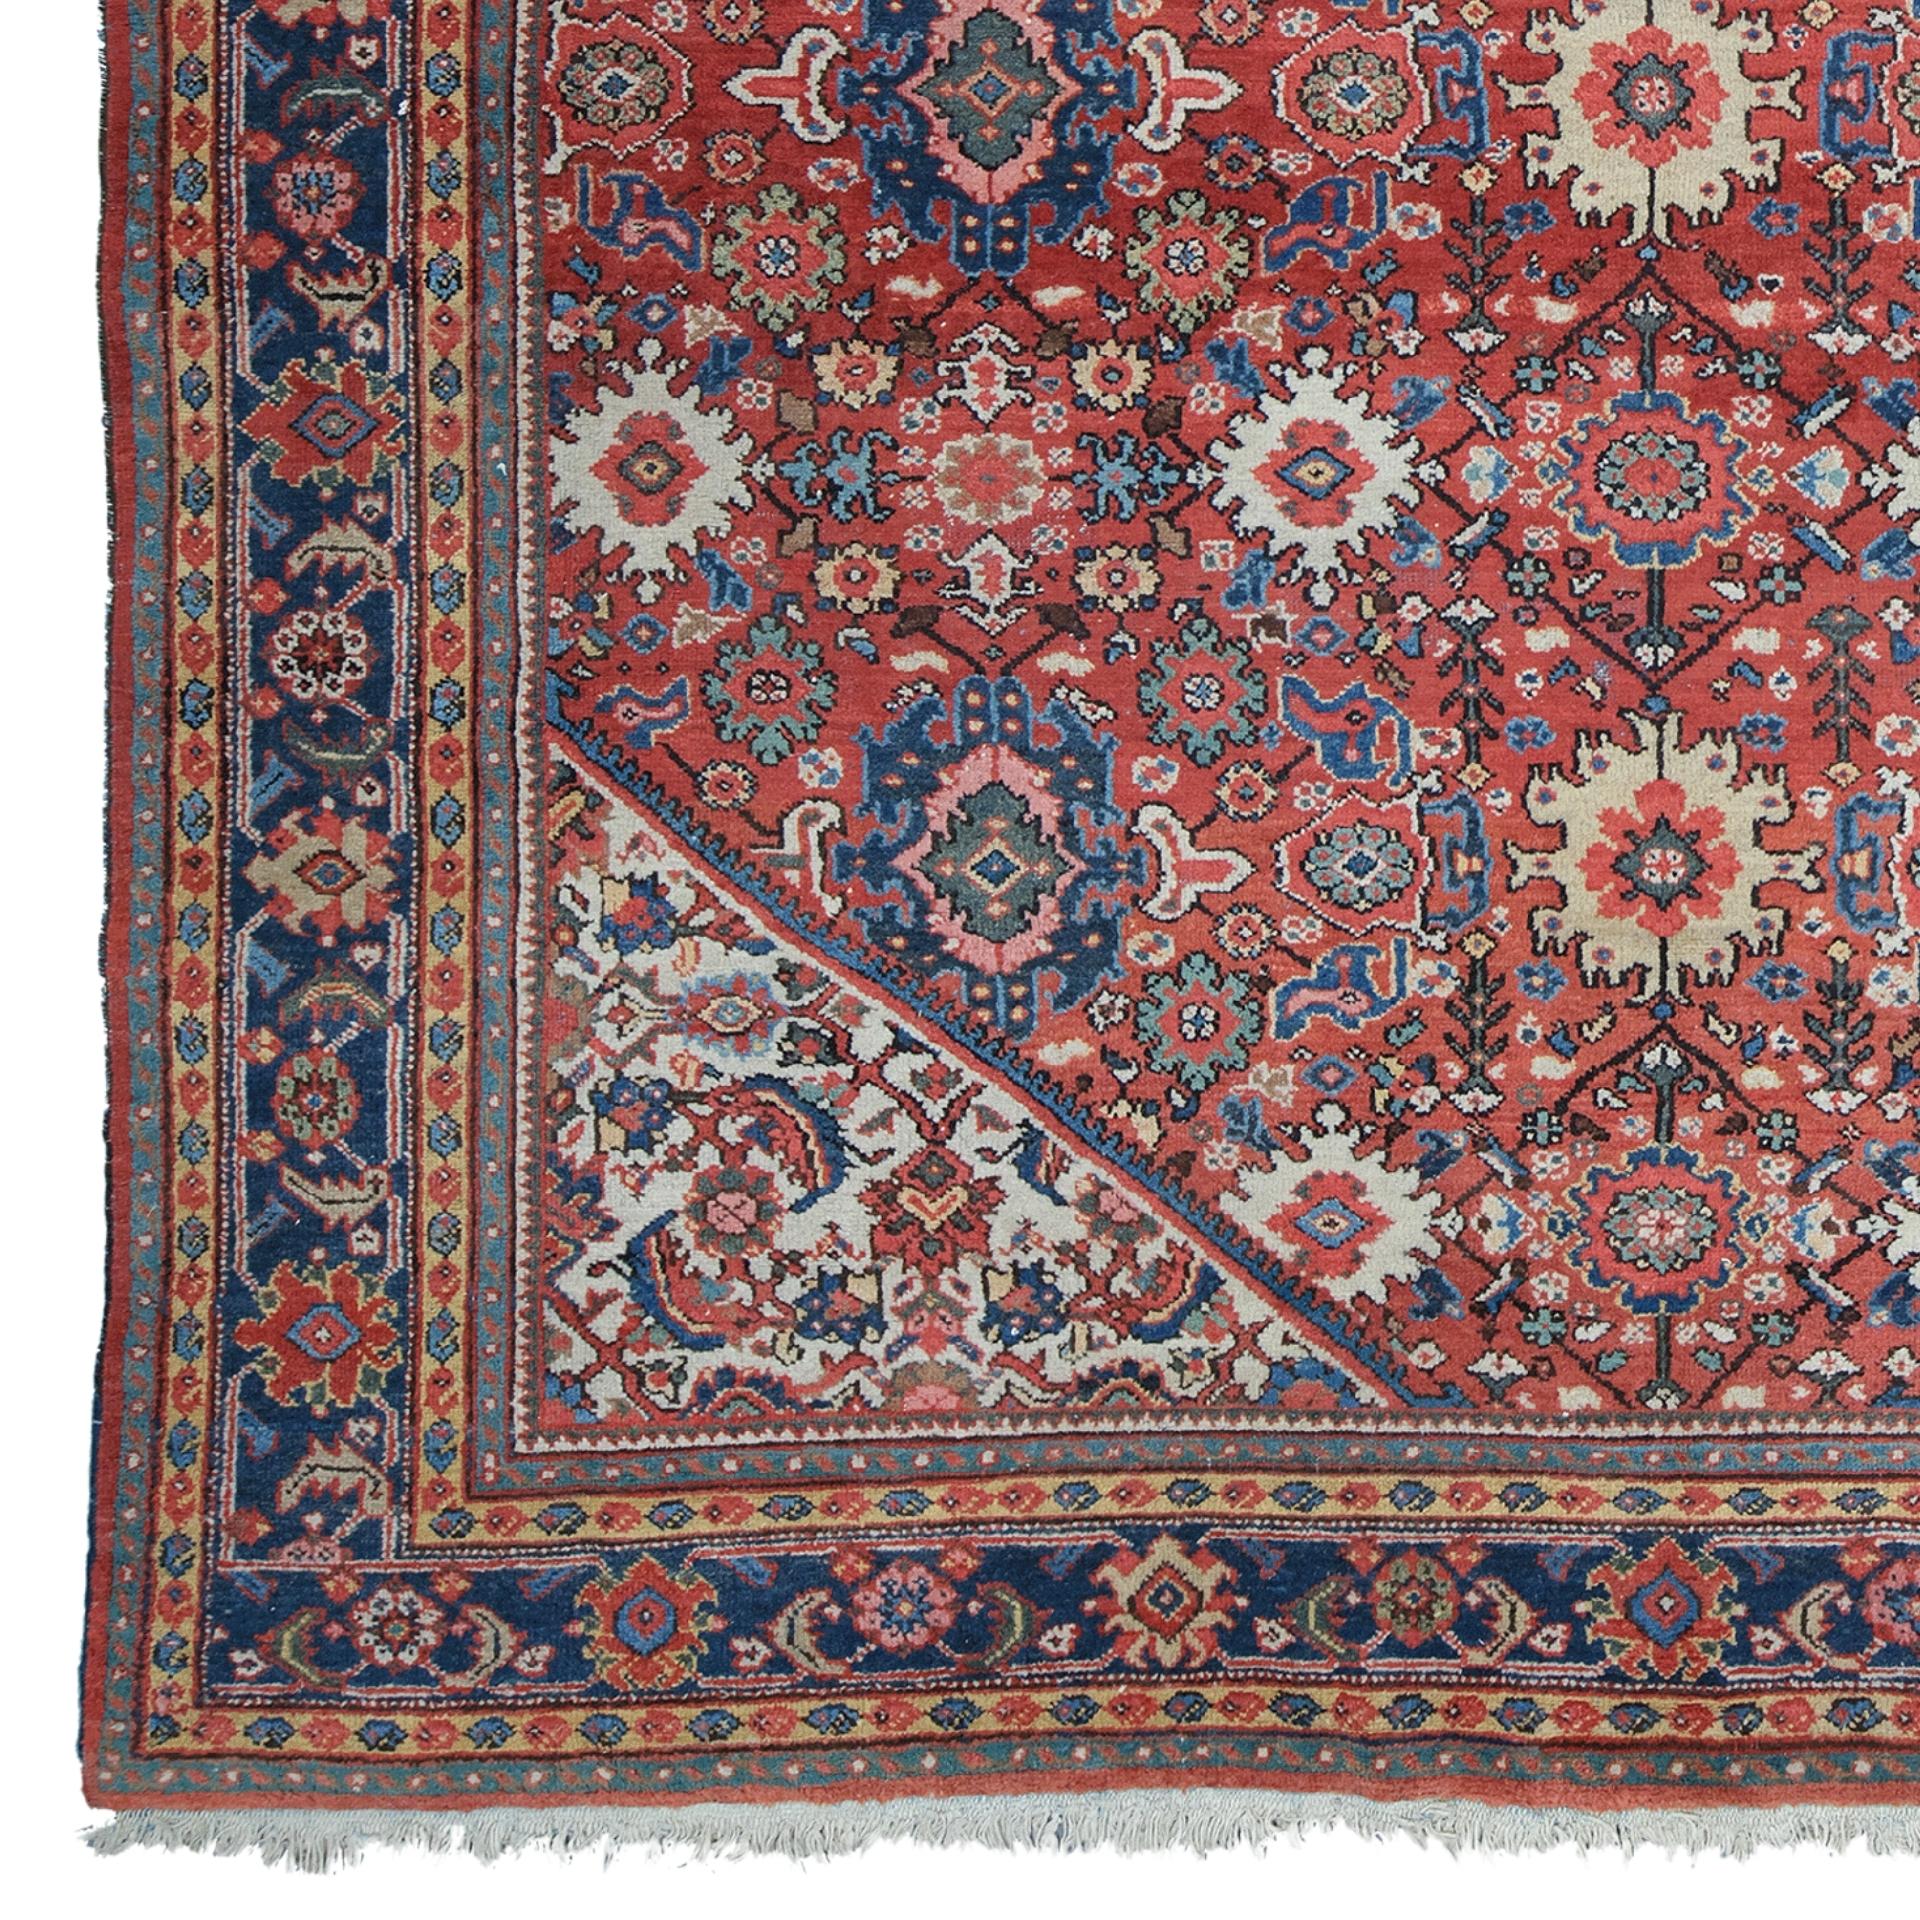 This hand-woven carpet adds nobility to any space with its rich history and sophisticated design. This carpet in red, blue and beige tones is eye-catching with its carefully chosen color palette and detailed patterns.

On the edges, there are